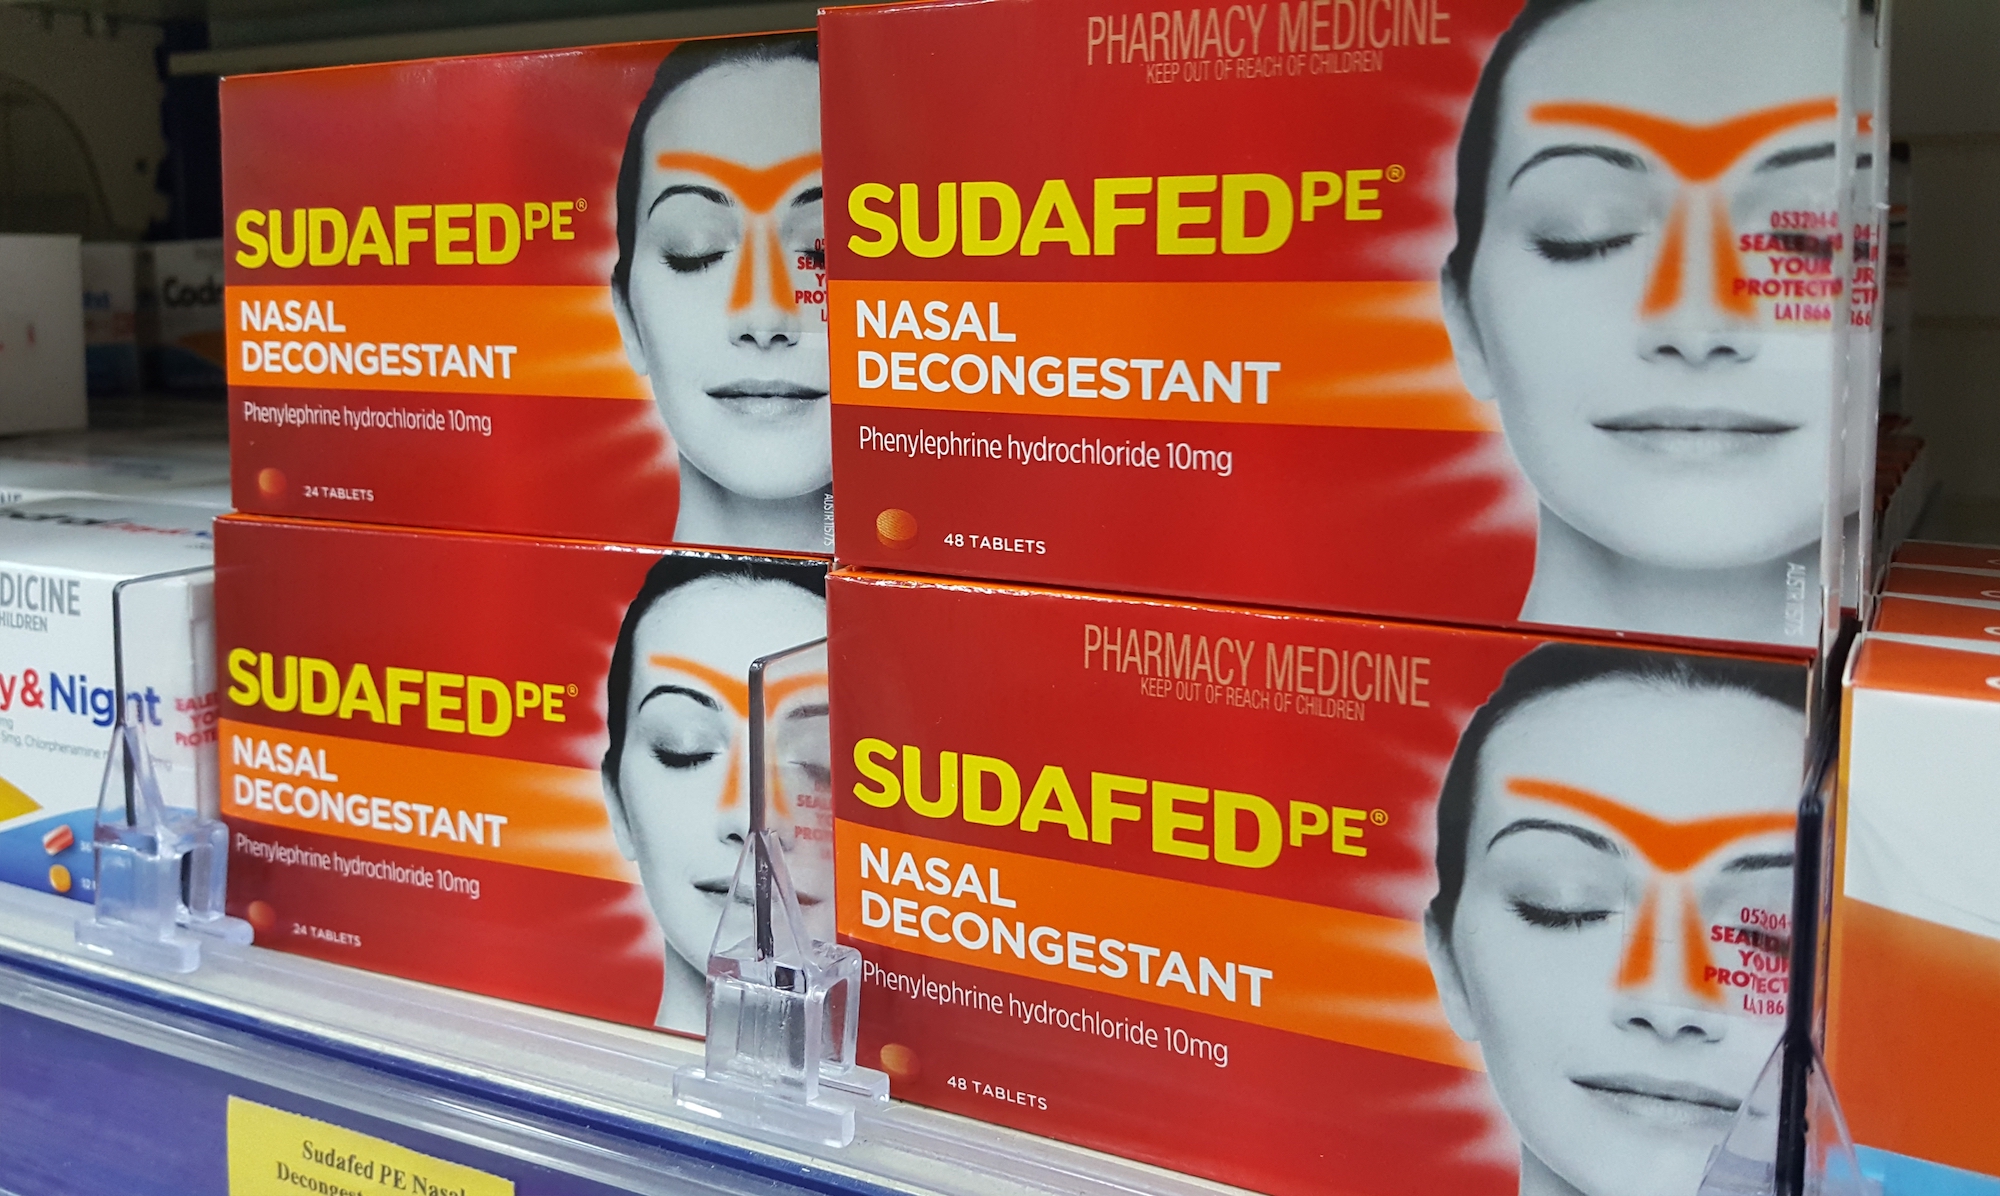 Four red boxes of Sudafed PE stacked on a shelf